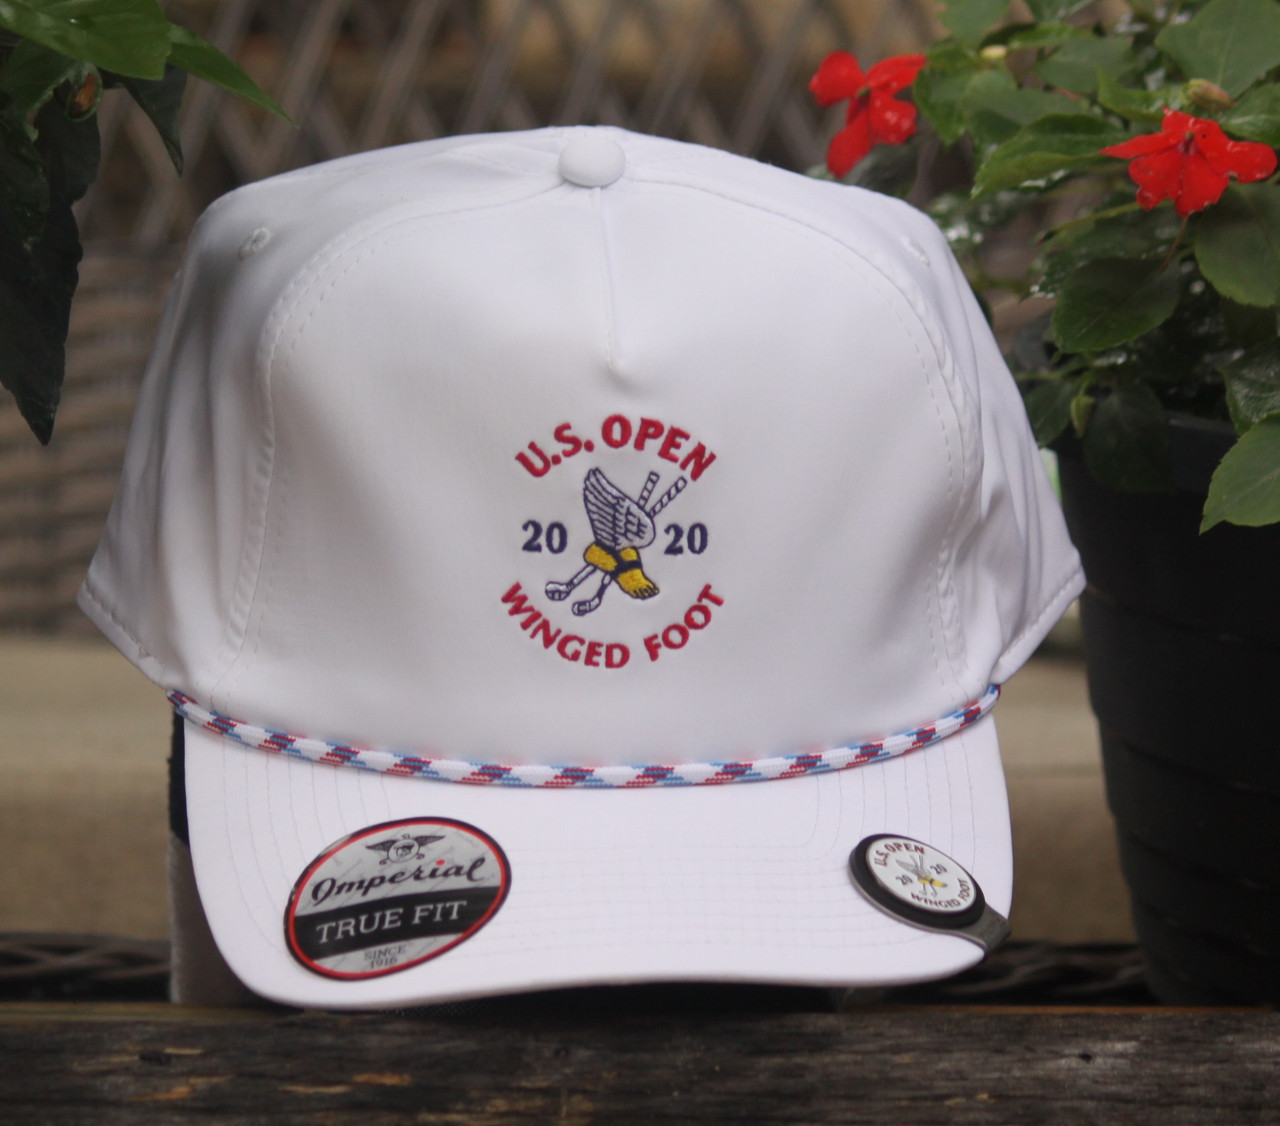 US Open 2020 Winged Foot hat